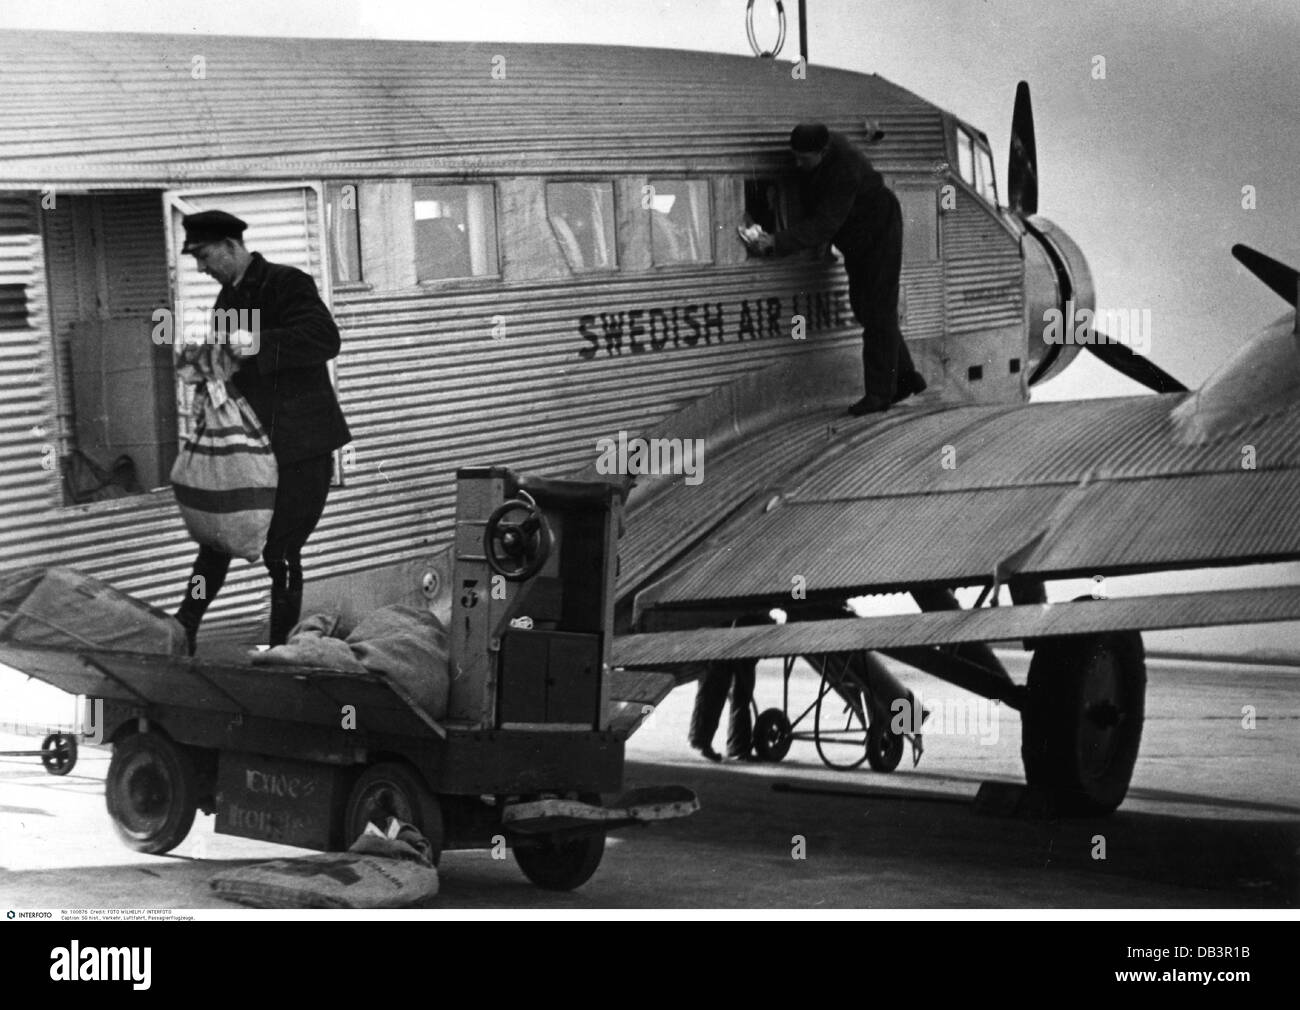 transport / transportation,aviation,passenger plane,Junkers Ju 52,Swedish Air Lines,airport,Zweden,Netherlands,1946,1940s,40s,20th century,historic,historical,Holland,transport aircraft,transport plane,transport,transport aircraft,transport planes,transports,commercial aircraft,commercial aircraft,airplane,aeroplane,plane,airplanes,aeroplanes,planes,airfield,airfields,service,cargo,loading,mail bag,mail bags,airmail,air-mail,by air-mail,clean,clean up,cleaning,propeller plane,propeller-driven aircraft,1930s,people,Additional-Rights-Clearences-Not Available Stock Photo